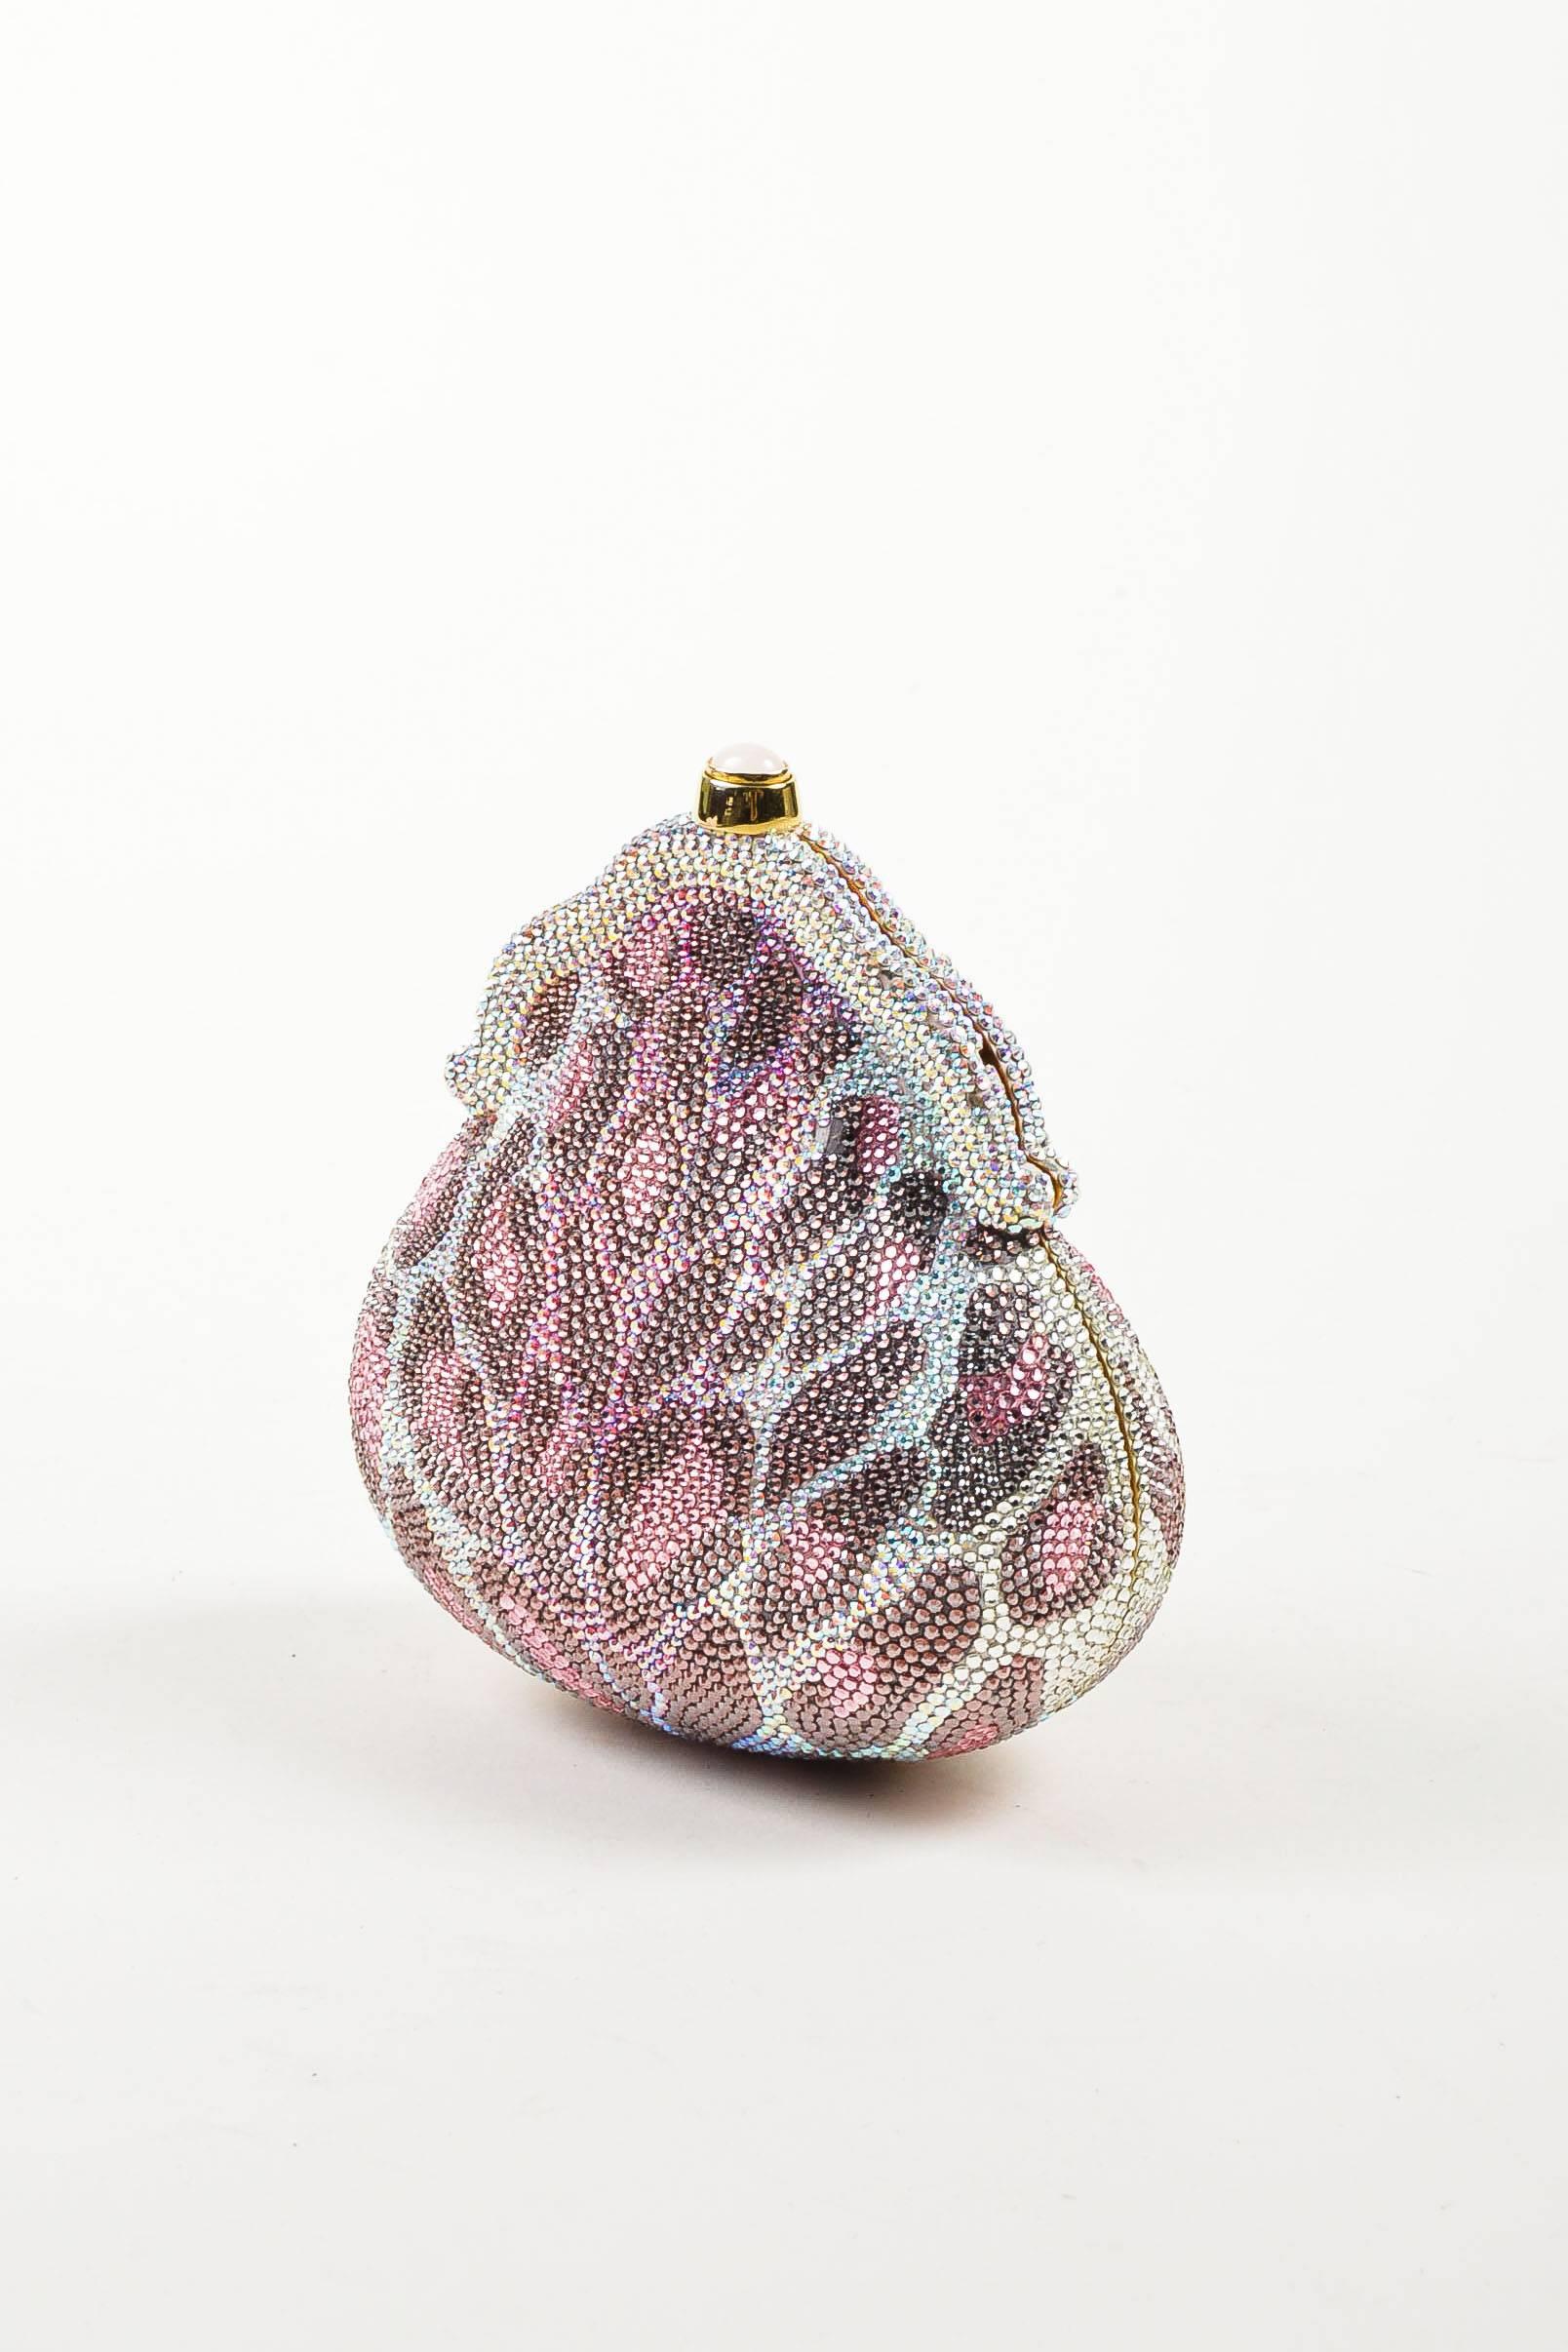 Judith Leiber Pink Purple Clear Crystal Leopard Print Clutch Frame Evening Bag In Good Condition In Chicago, IL